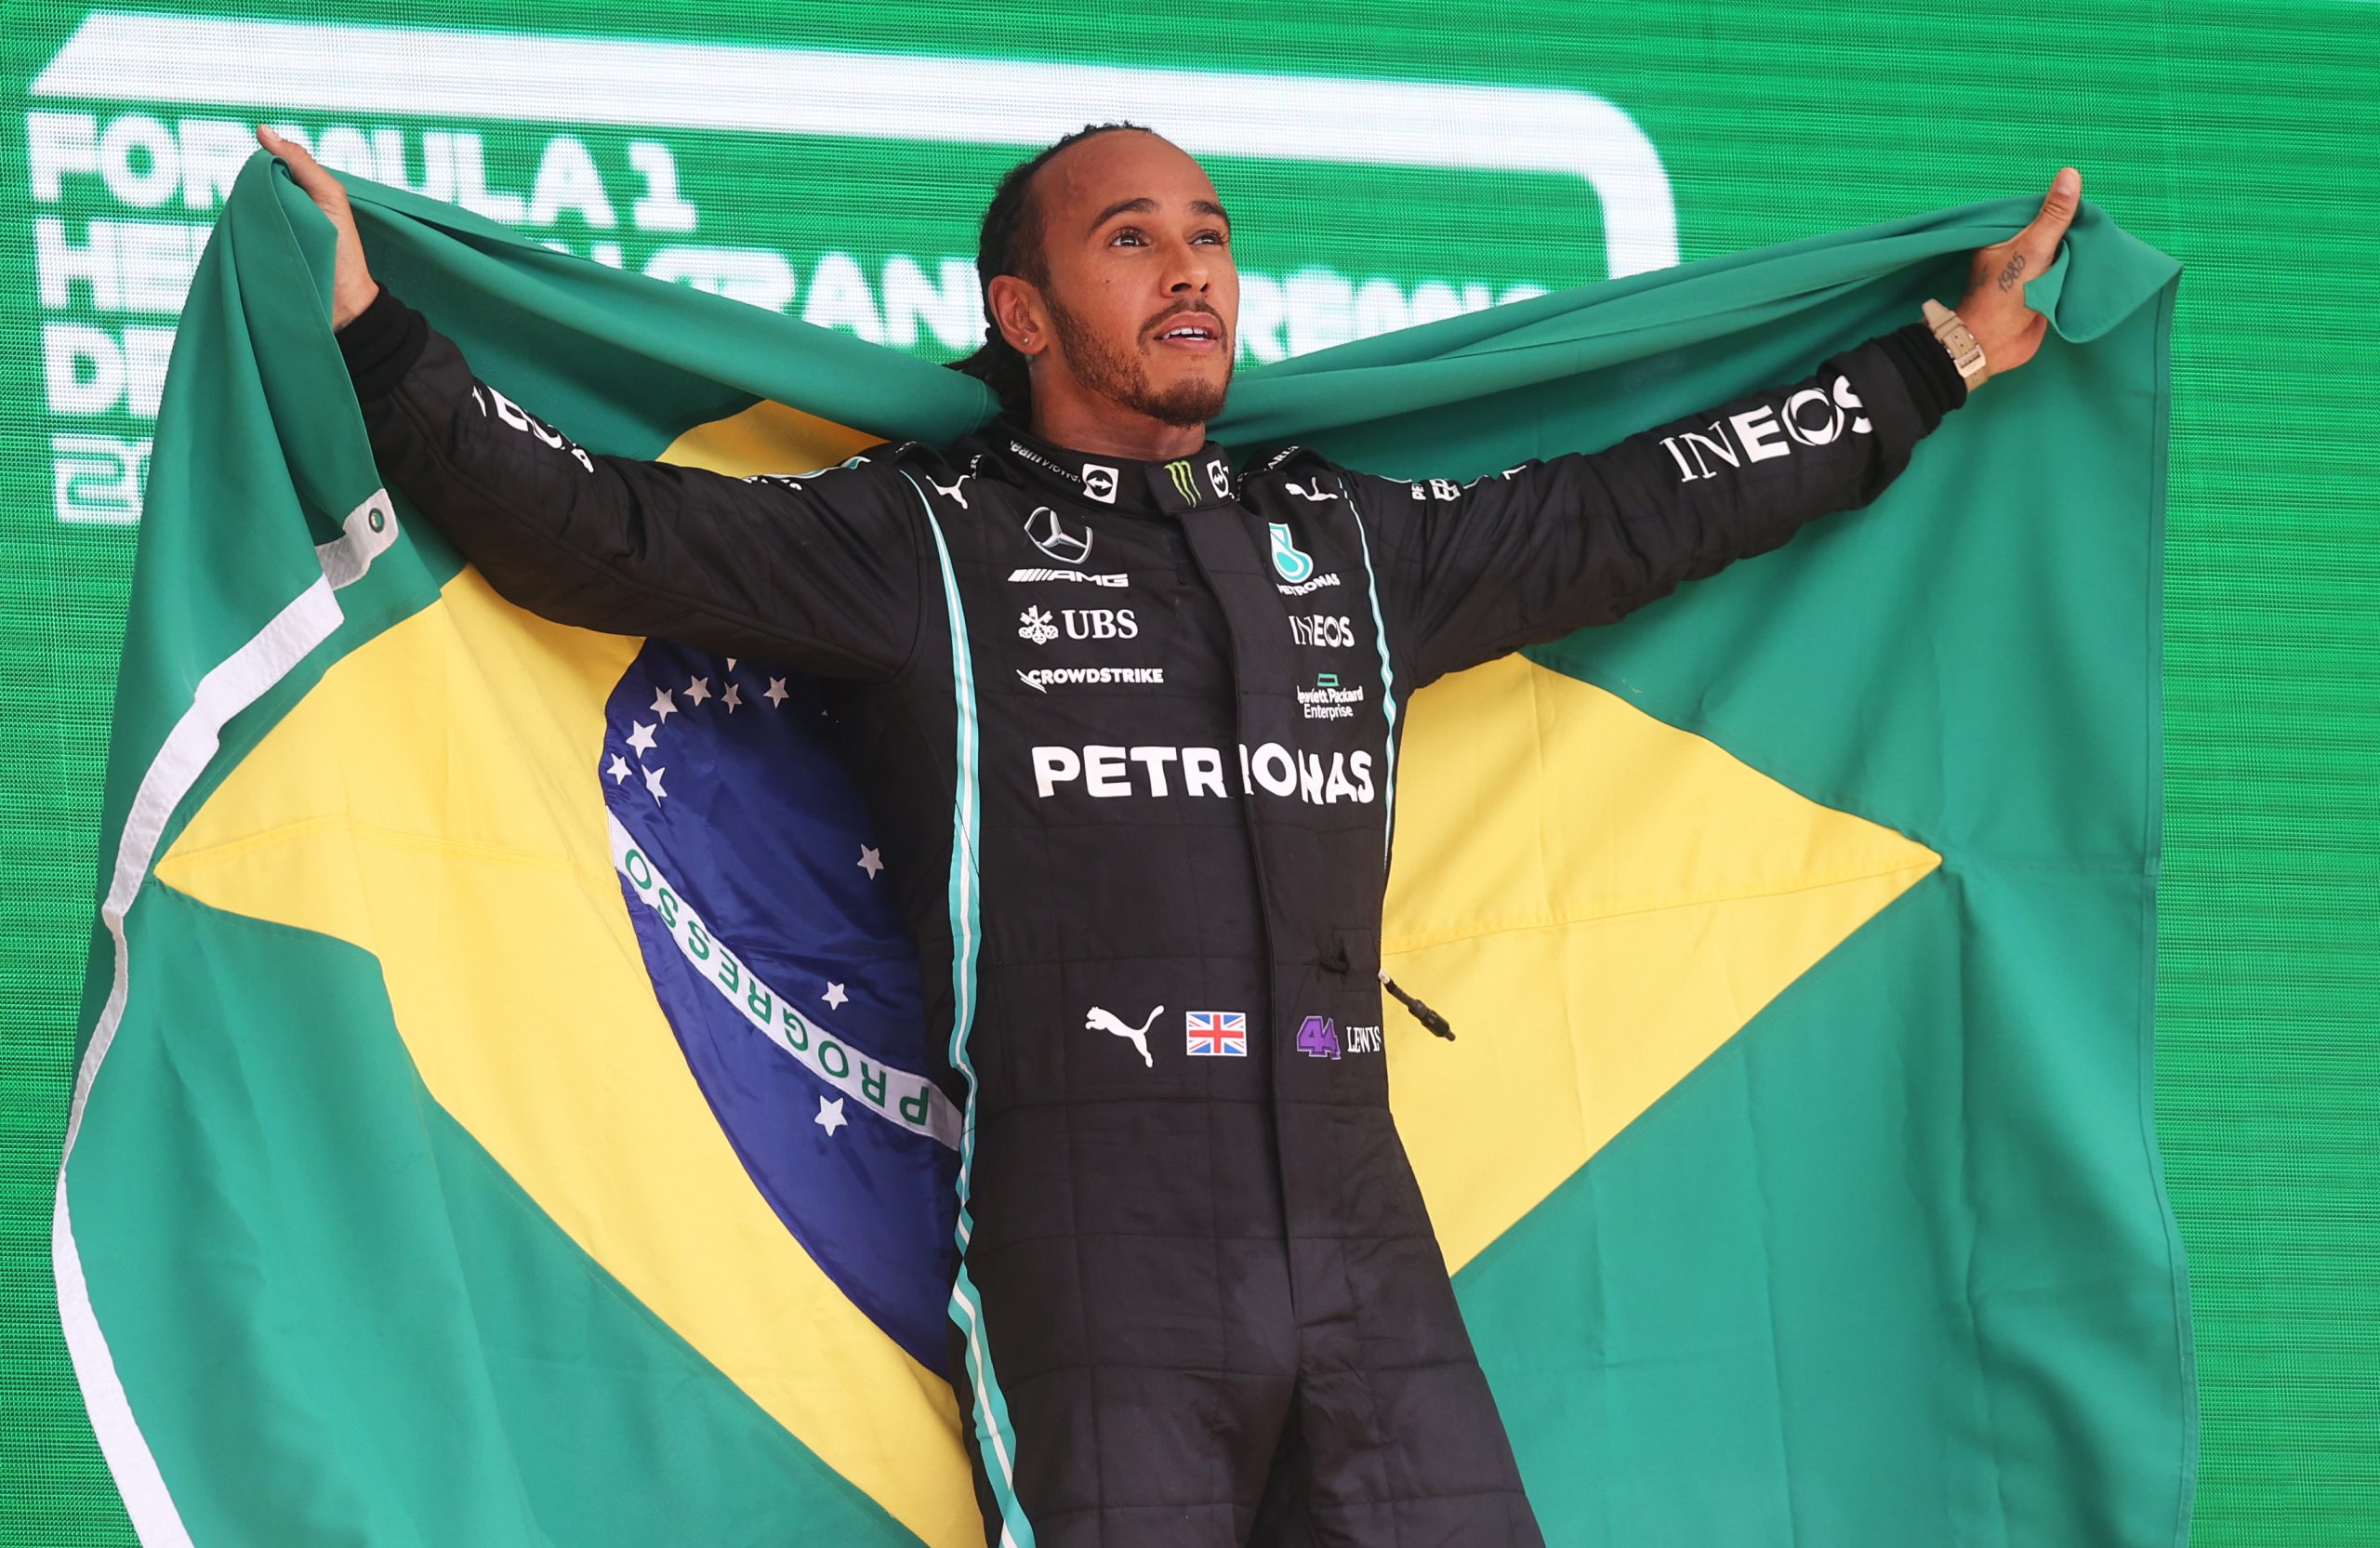 Lewis Hamilton Stuns in Sao Paulo Grand Prix With a Come From Behind Victory to Beat Max Verstappen